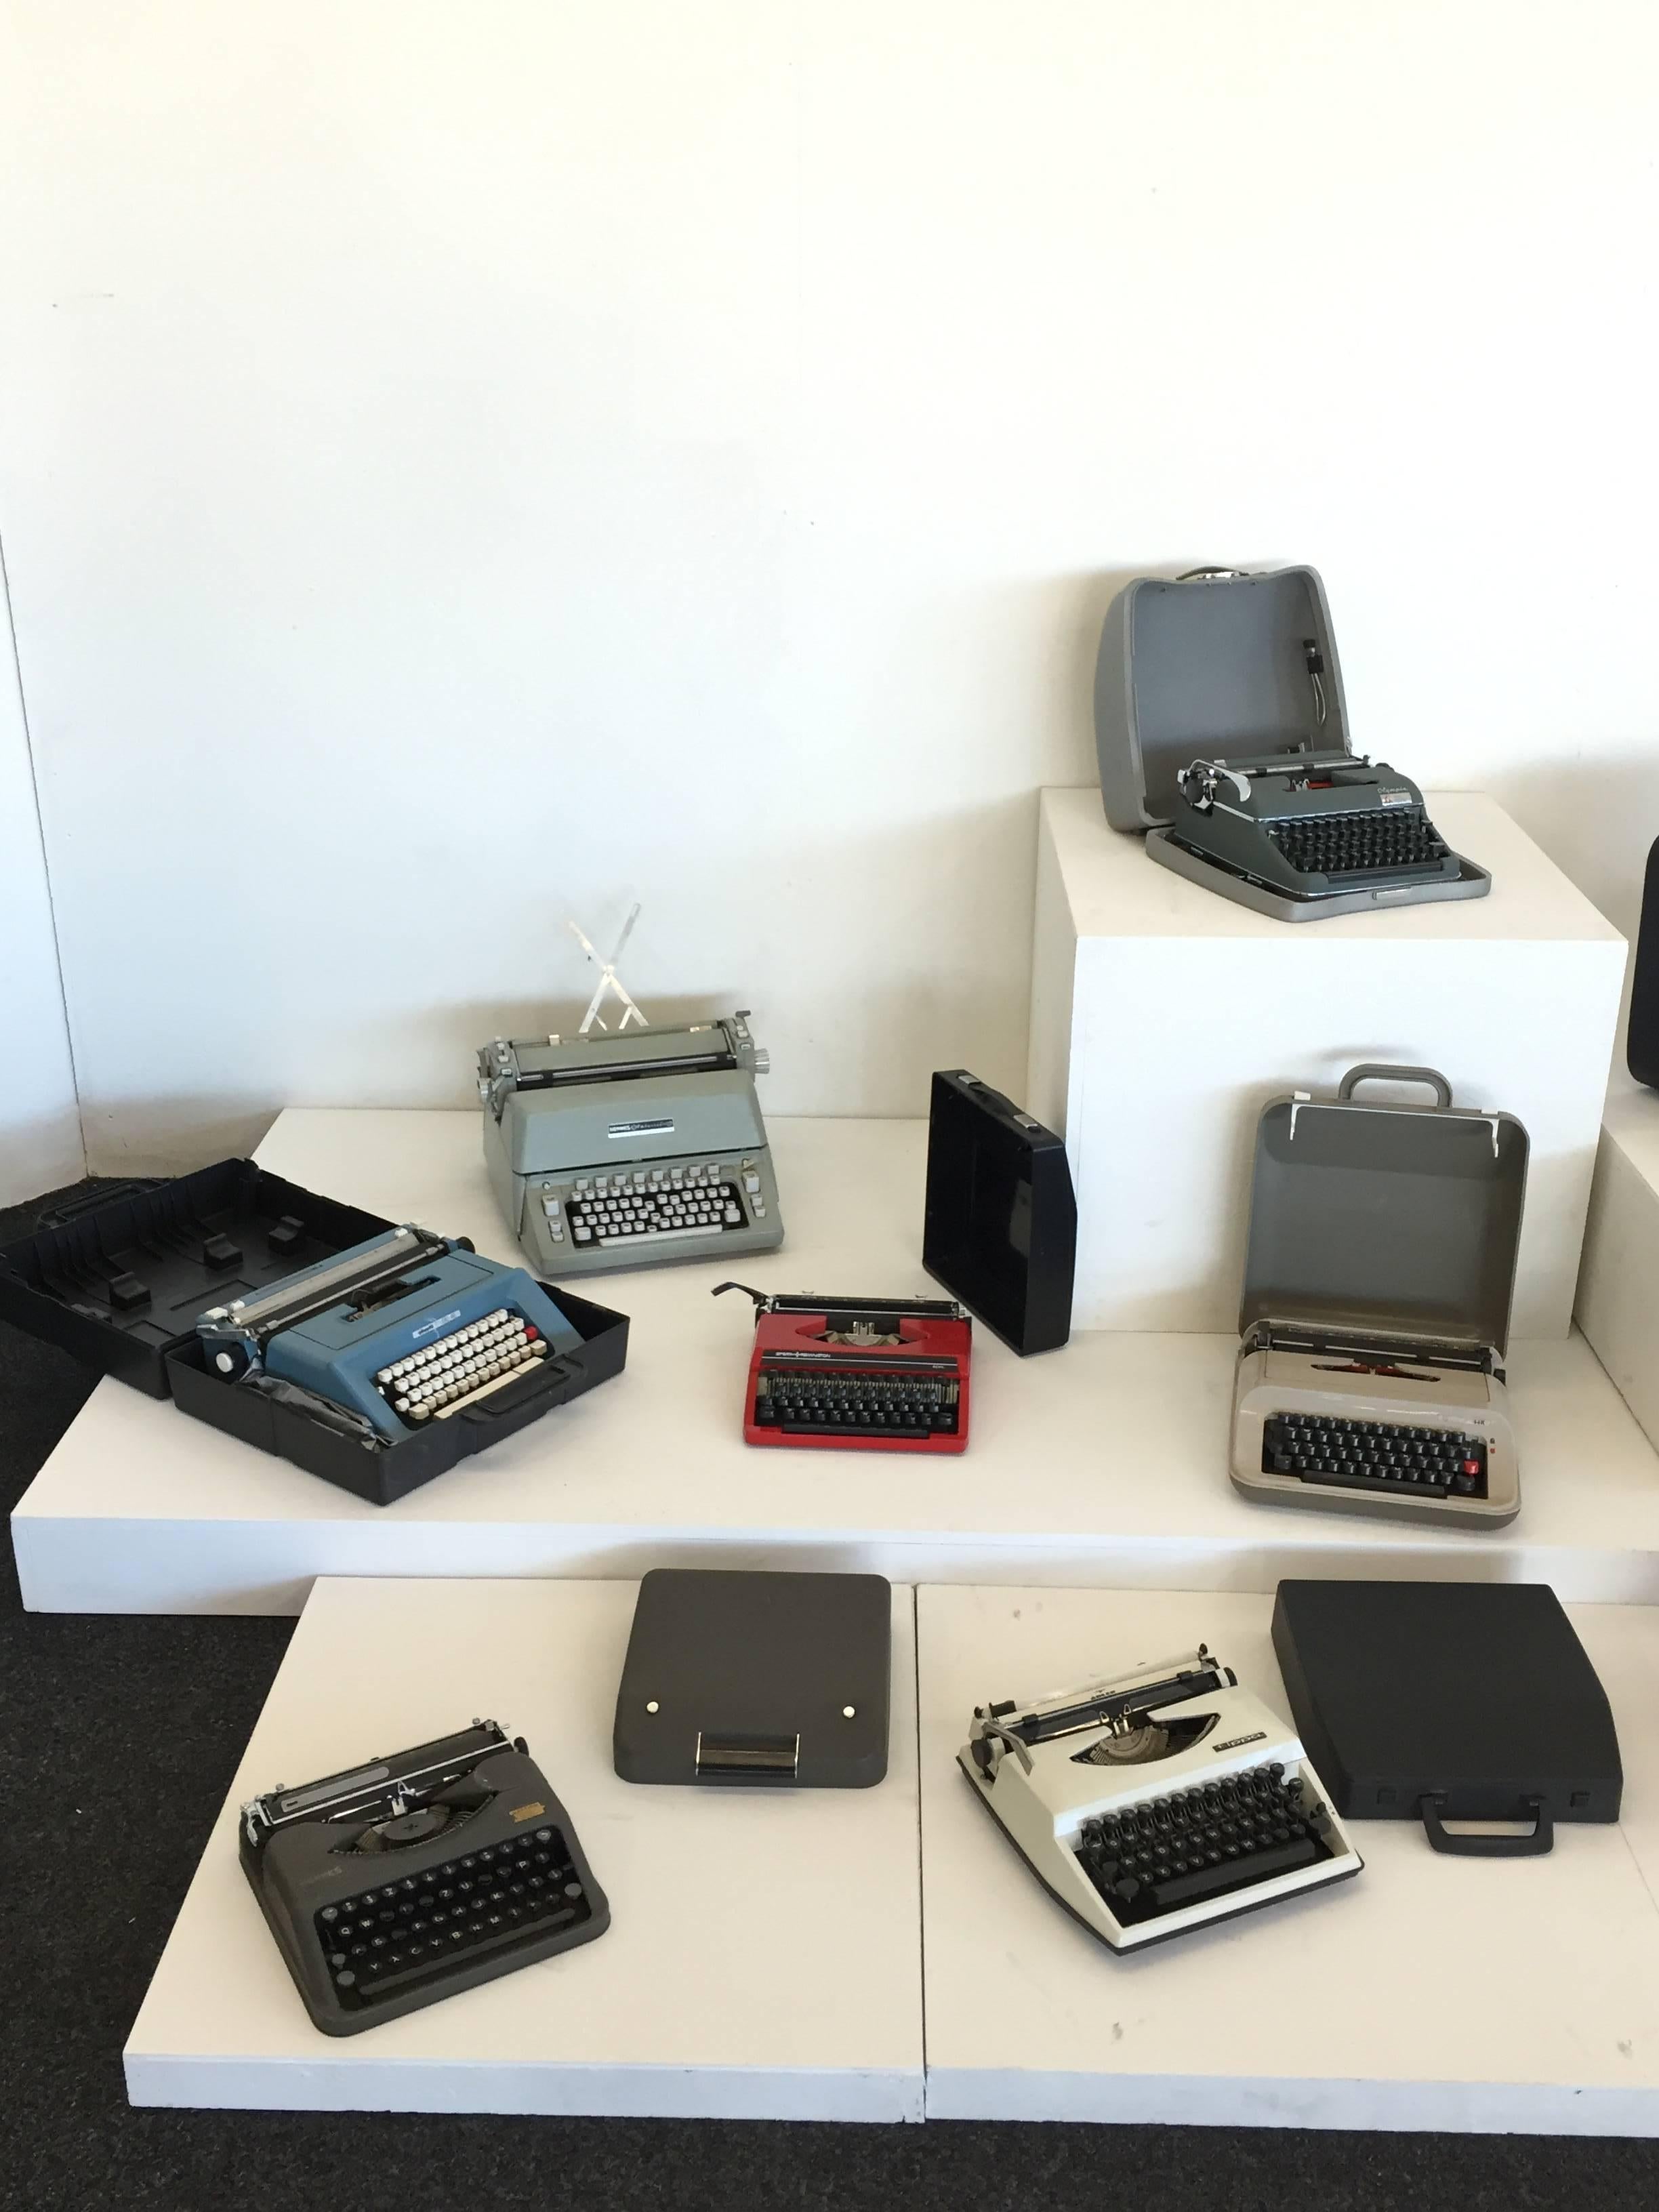 A stunning large collection of 15 different brand typewriters and two early calculators from Olivetti. The collection include some fine Swiss, German, Italian and British examples from the 1930s till 1970s: Hermes Olivetti Remington Olympia Adler